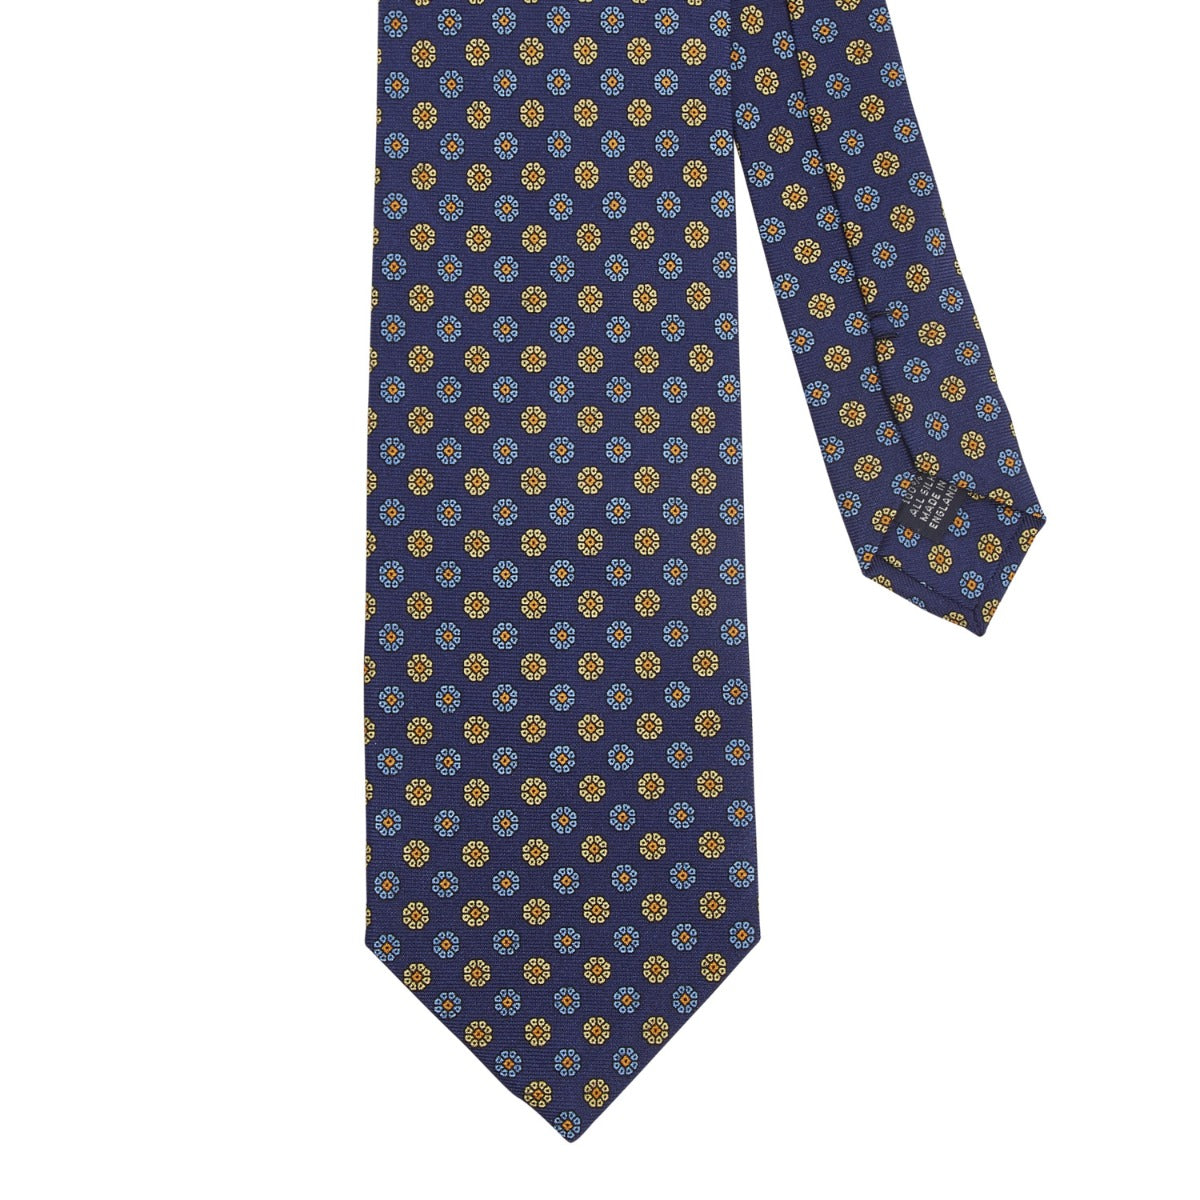 A Sovereign Grade Royal/Blue/Cream Maccesfield Corn Floral Motif tie showcasing highest quality craftsmanship on a white background, brought to you by KirbyAllison.com.